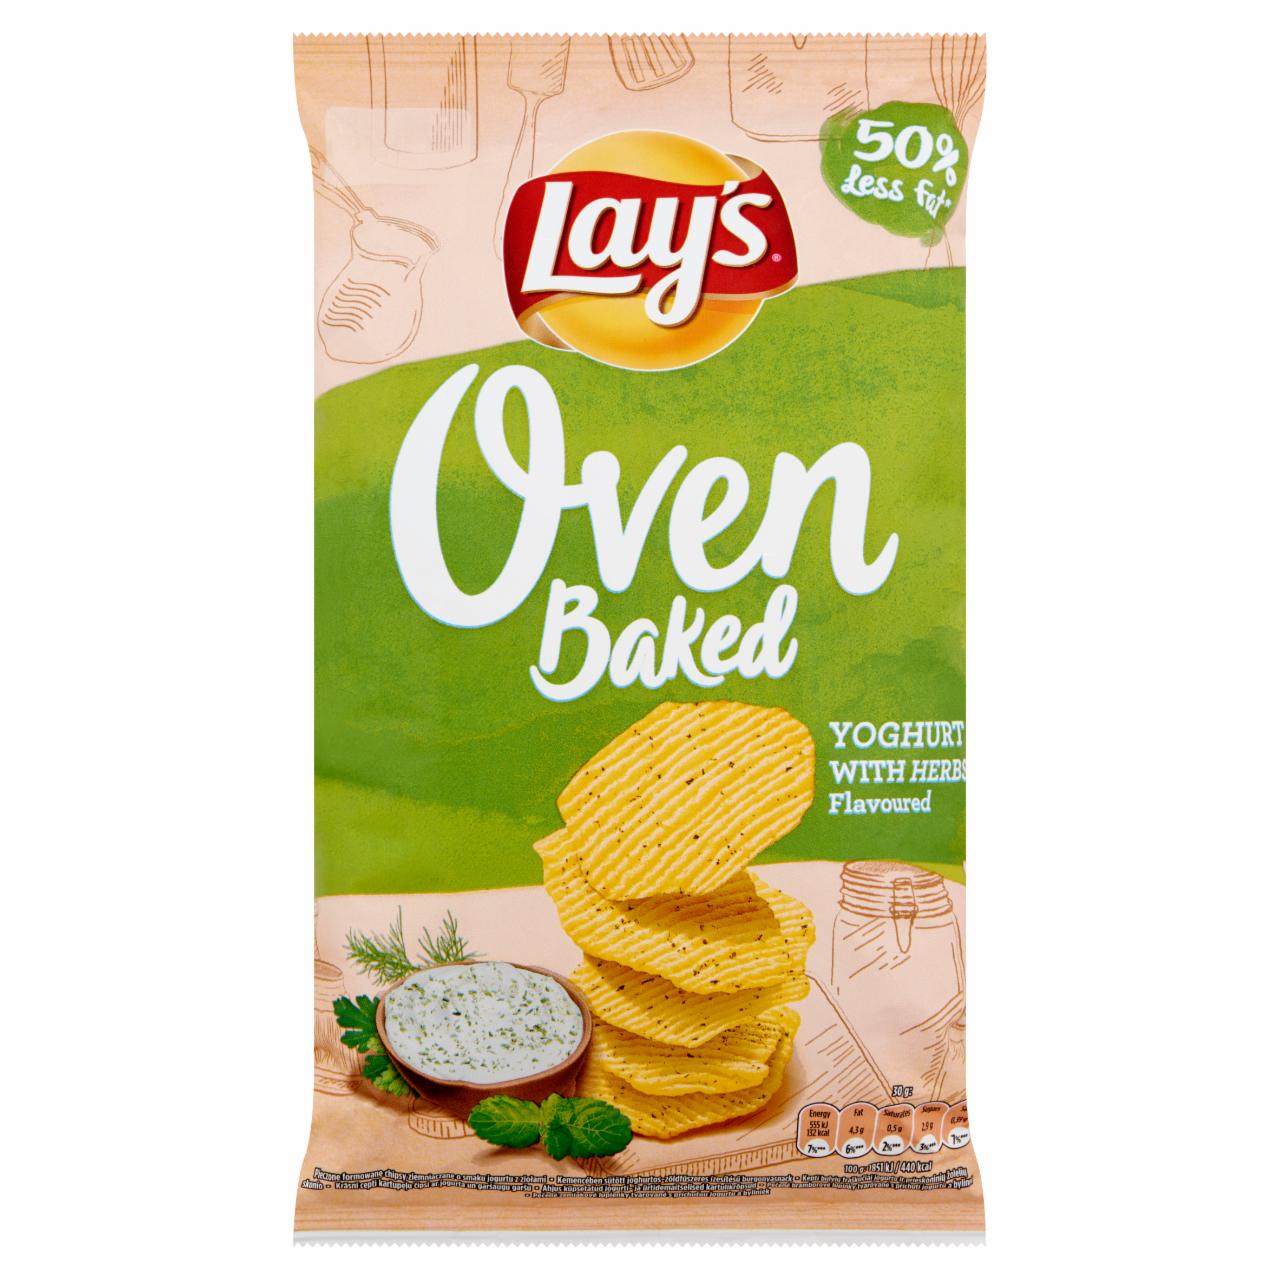 Fotografie - Oven baked yoghurt with herbs Lay's